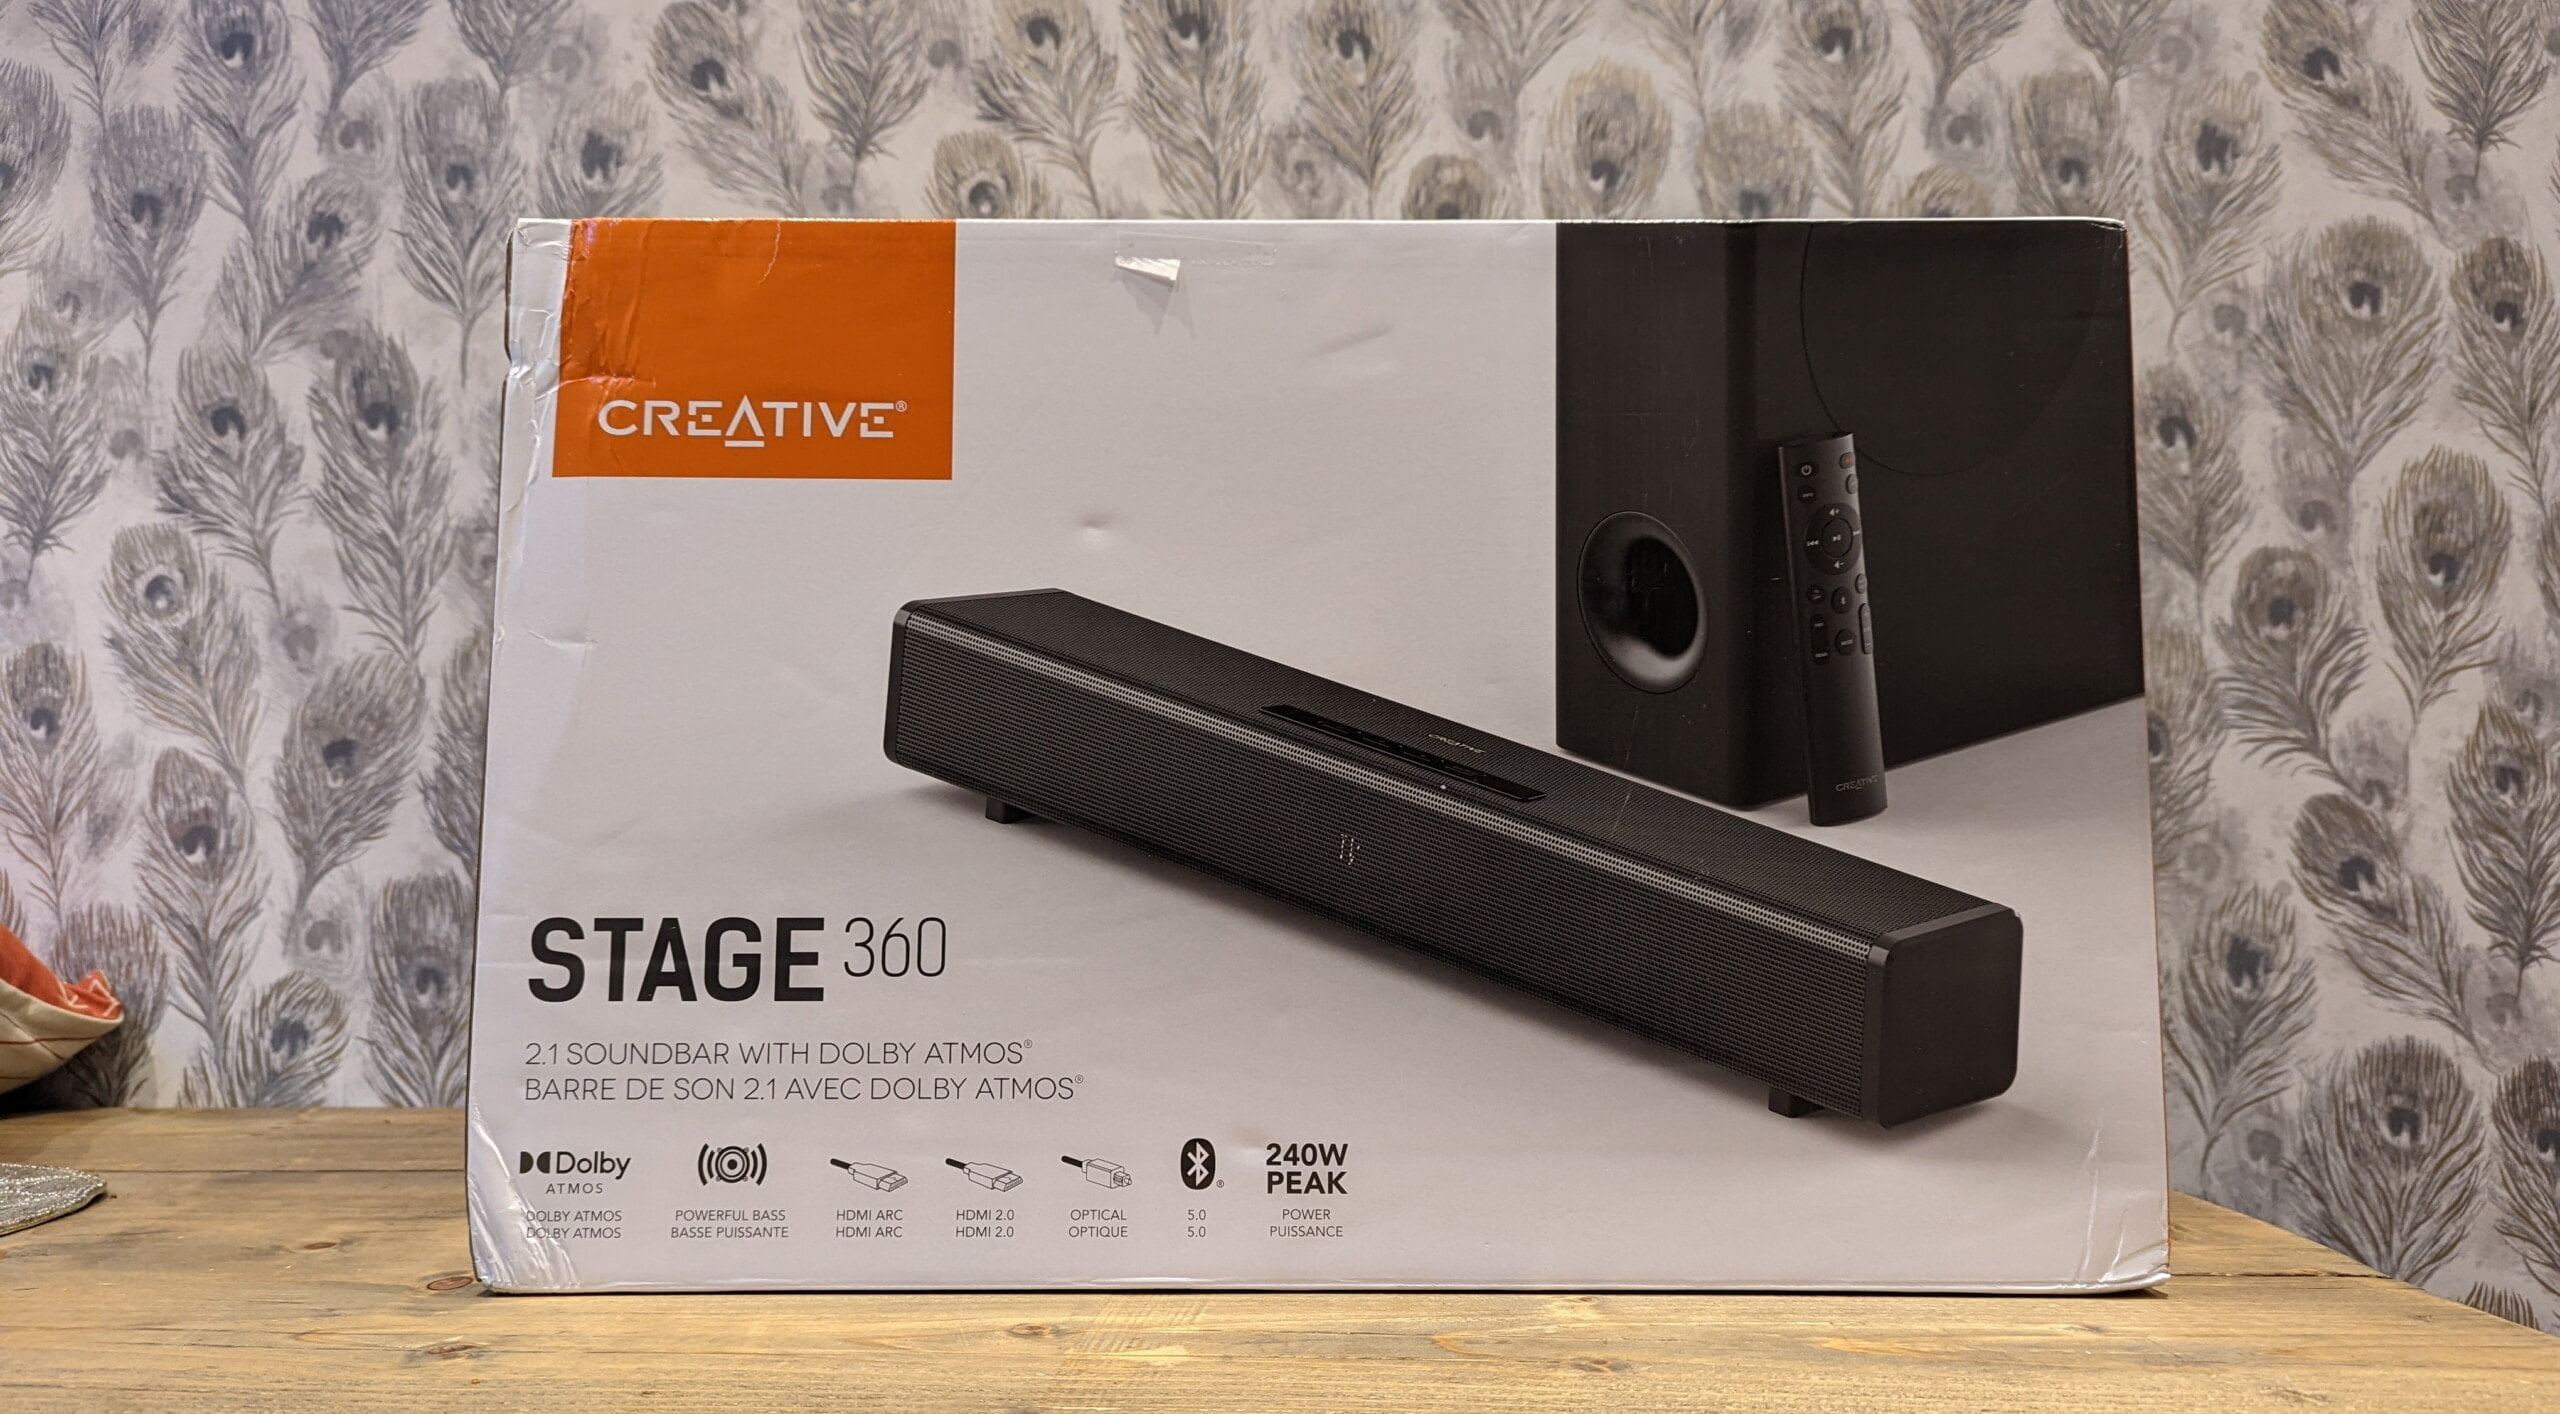 Creative Stage 360 2.1 Soundbar Review – Dolby Atmos Soundbar on the cheap ideal for PC gamers and consoles